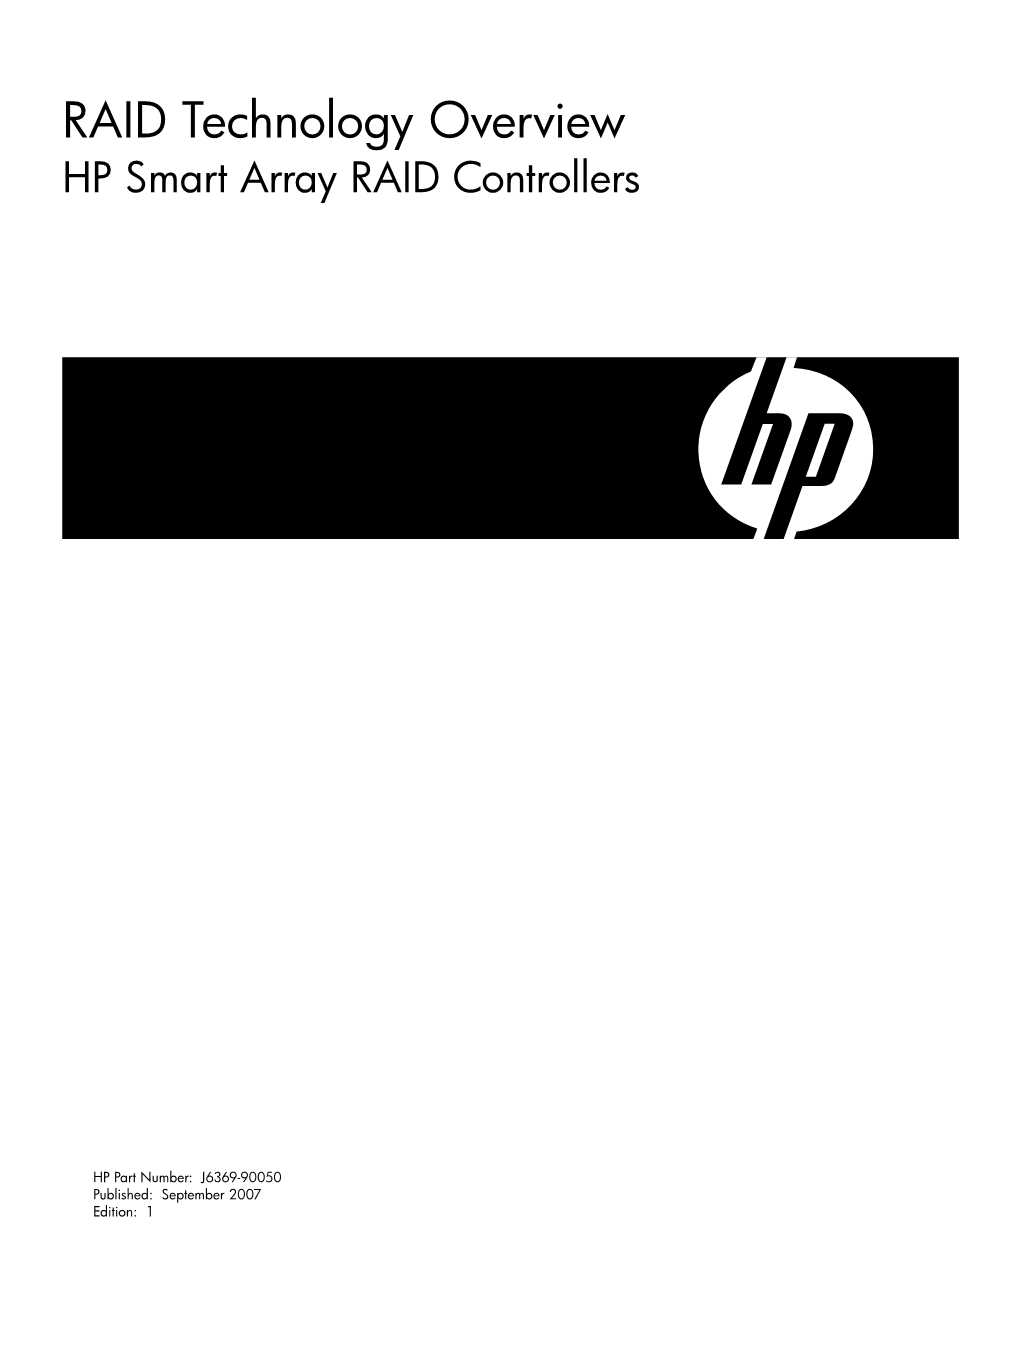 RAID Technology Overview HP Smart Array RAID Controllers